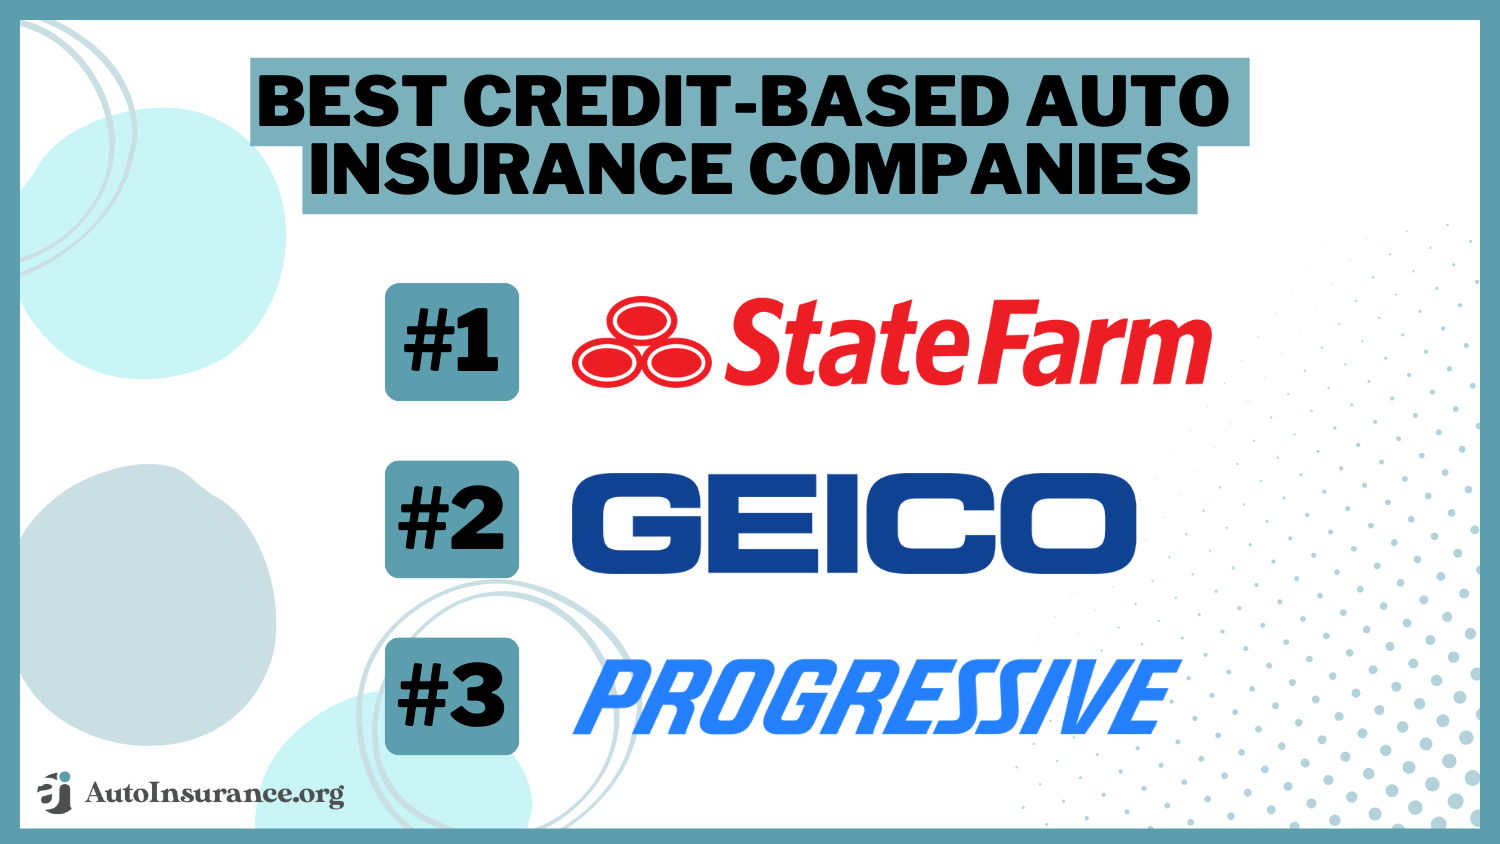 Best Credit-Based Auto Insurance Companies